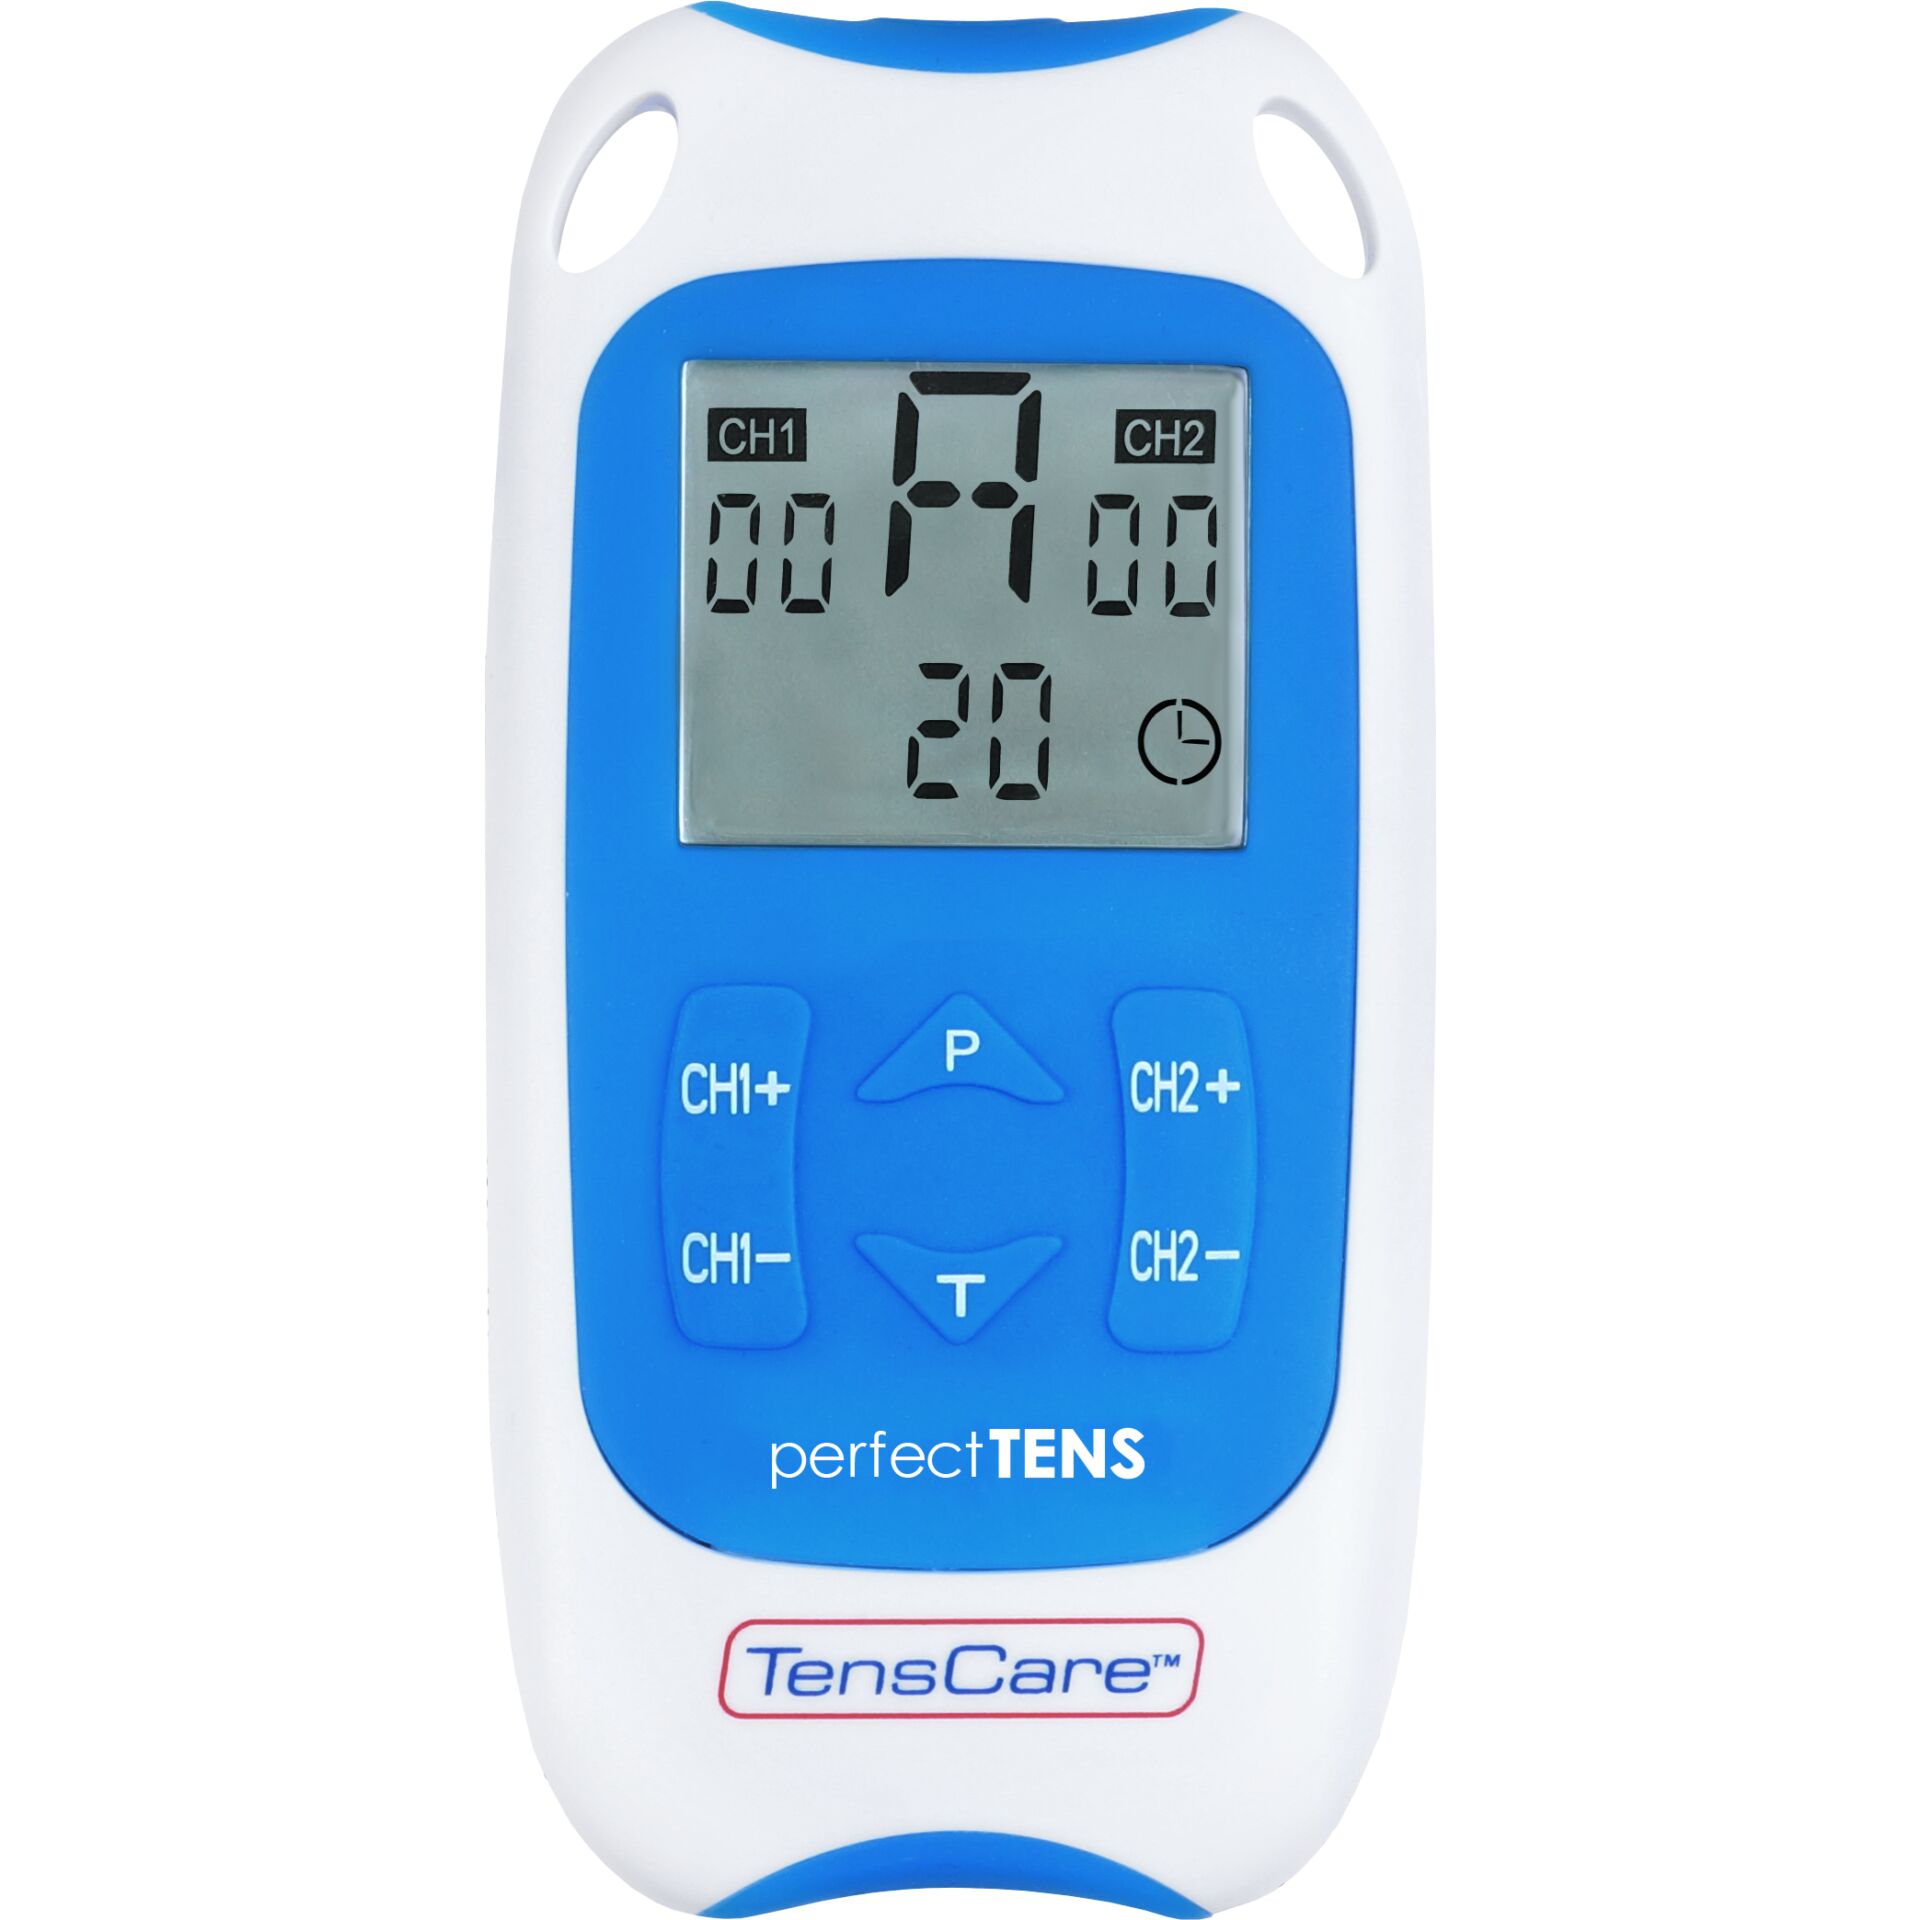 TensCare Perfect TENS Pain Relief Machine